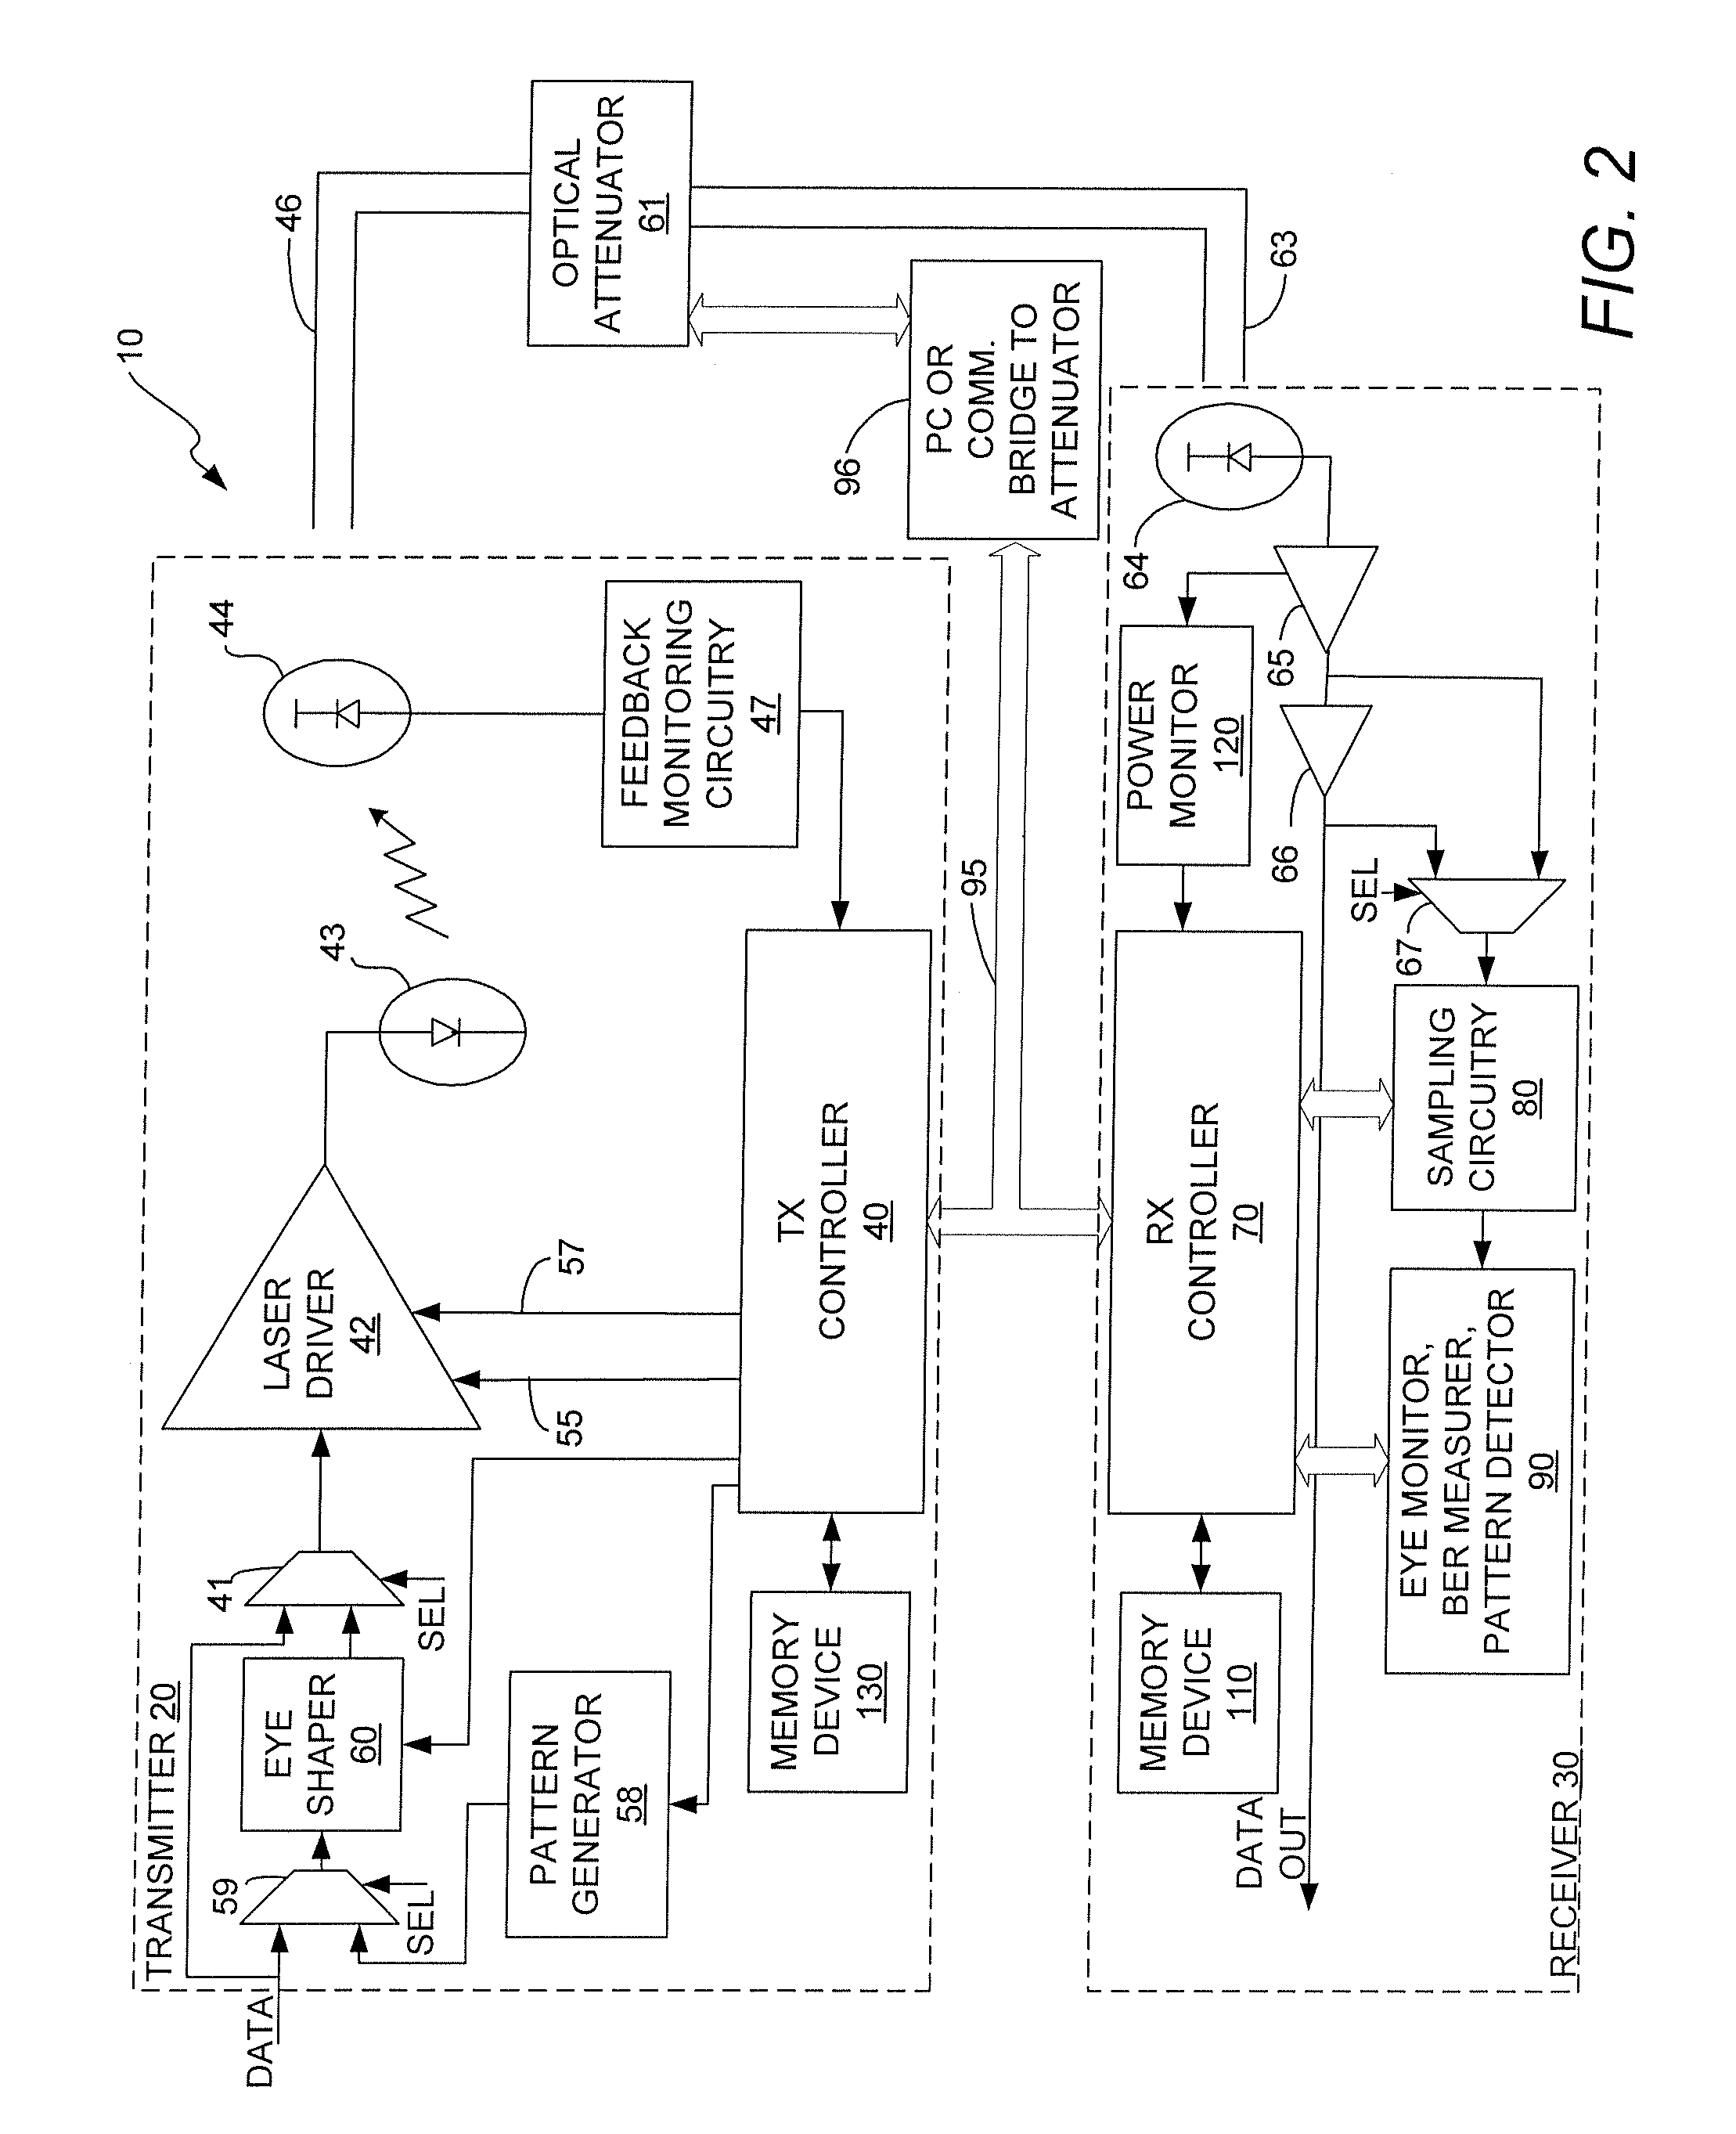 Method and apparatus for performing receiver sensitivity testing and stressed receive sensitivity testing in a transceiver